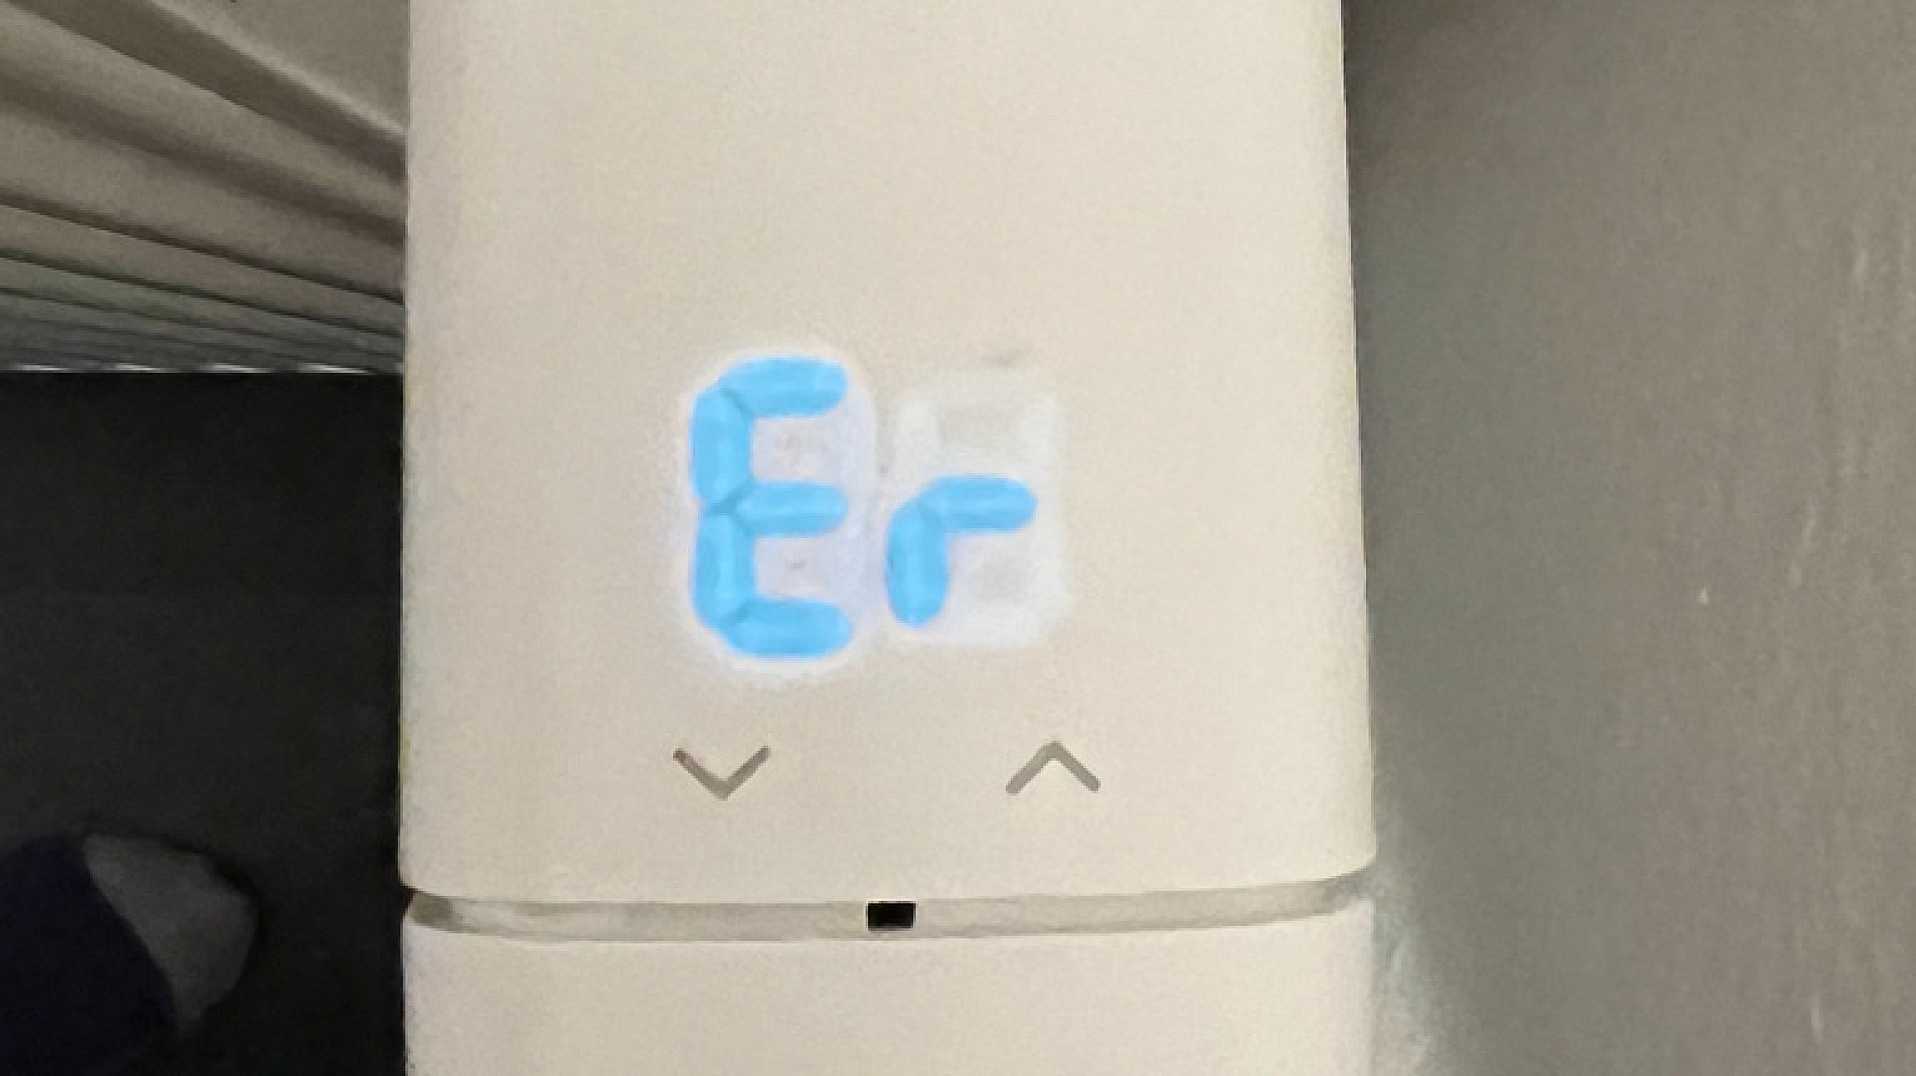 Eve Thermo: Smartes Thermostat zeigt Fehlermeldung